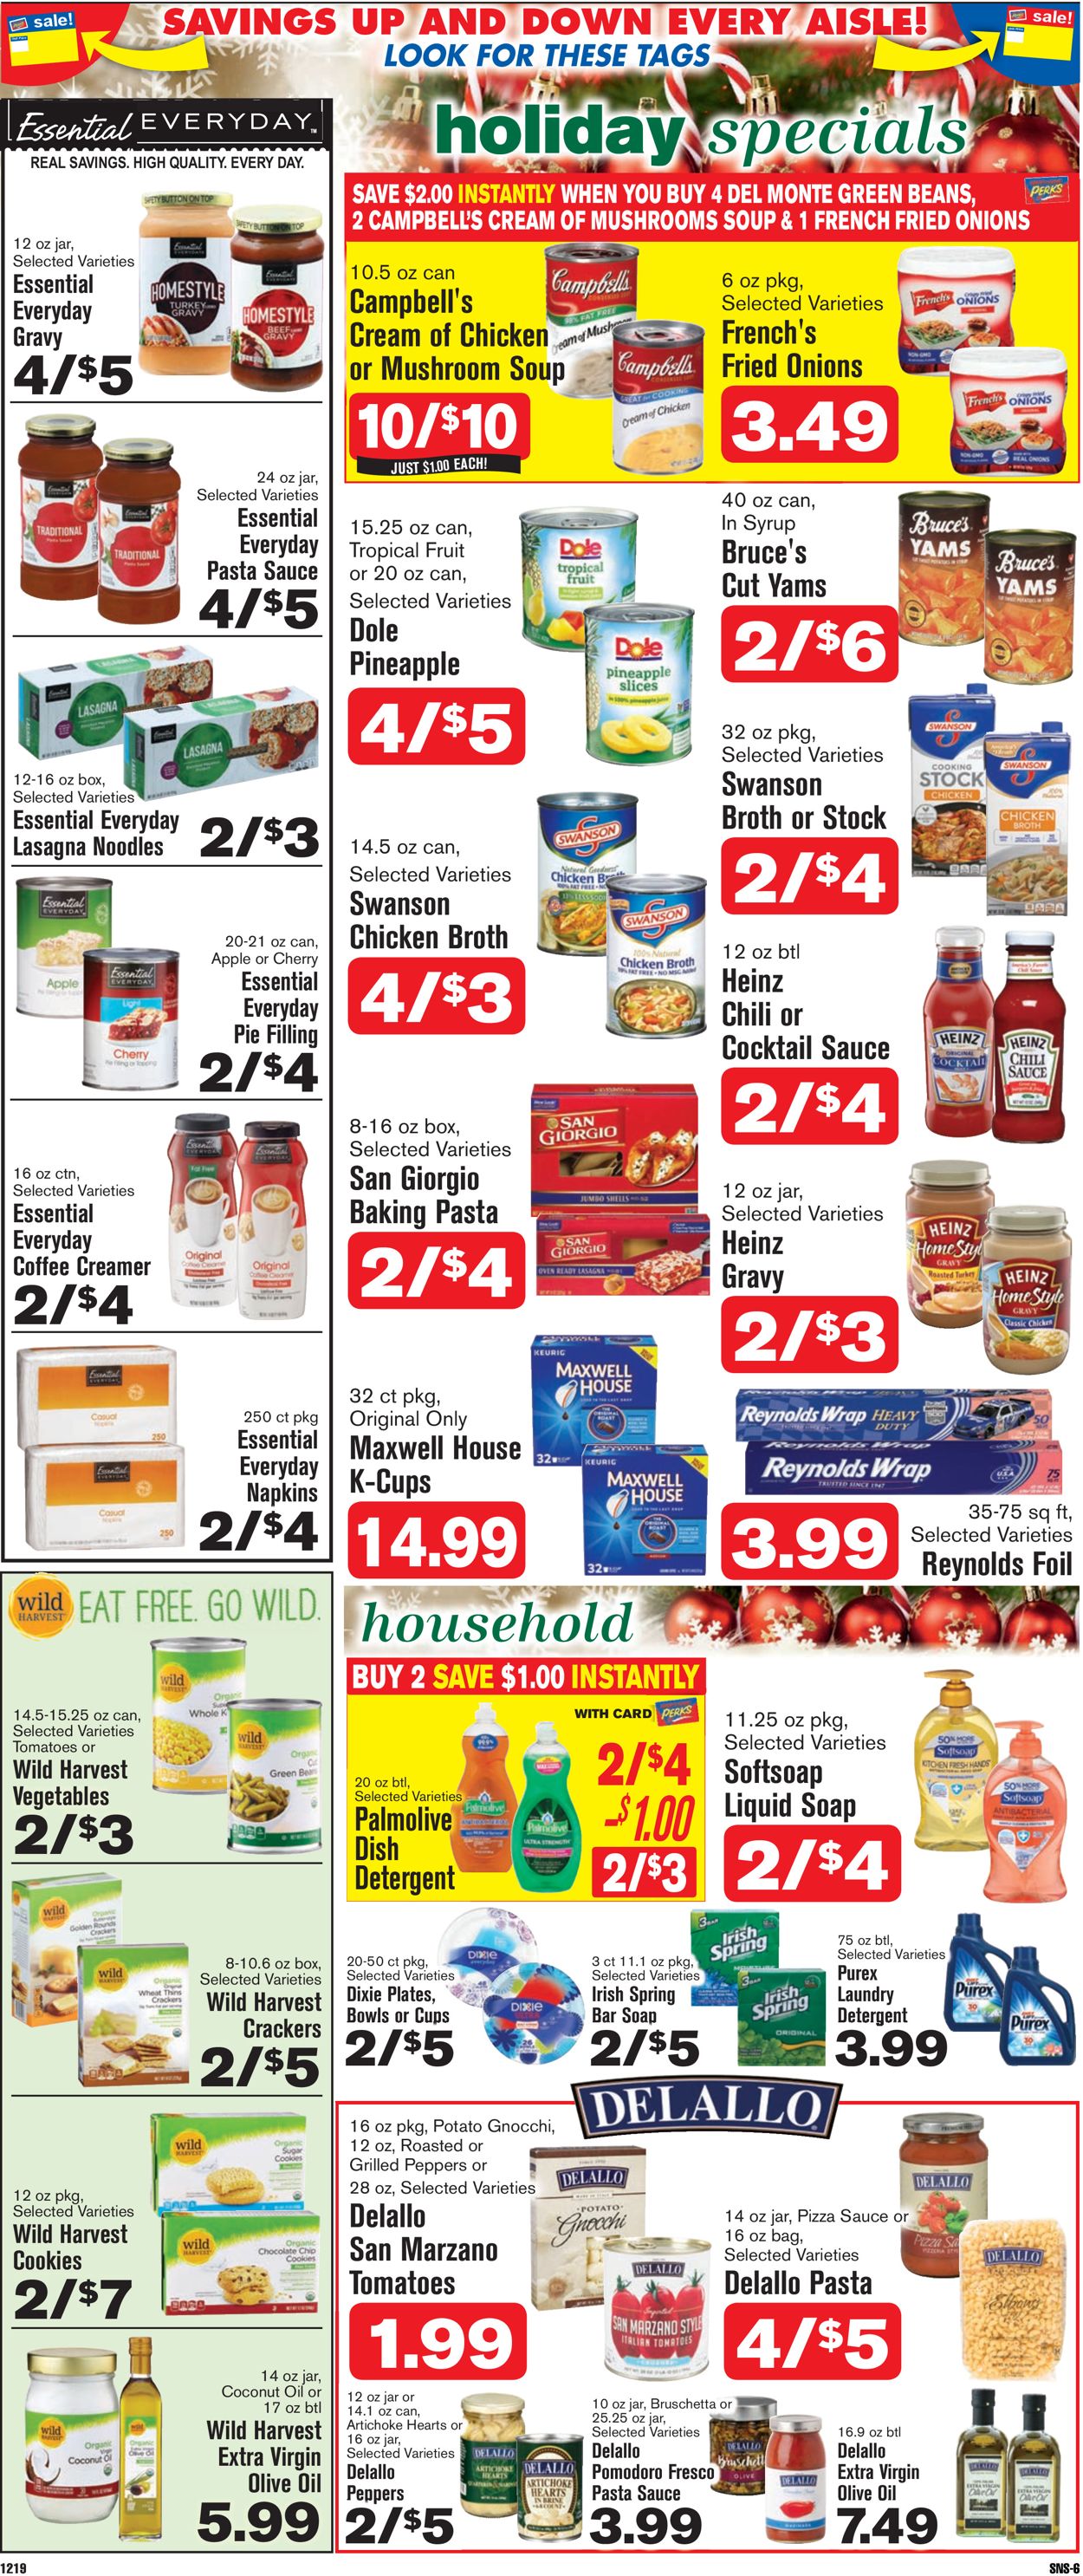 Catalogue Shop ‘n Save - Holiday Ad 2019 from 12/19/2019